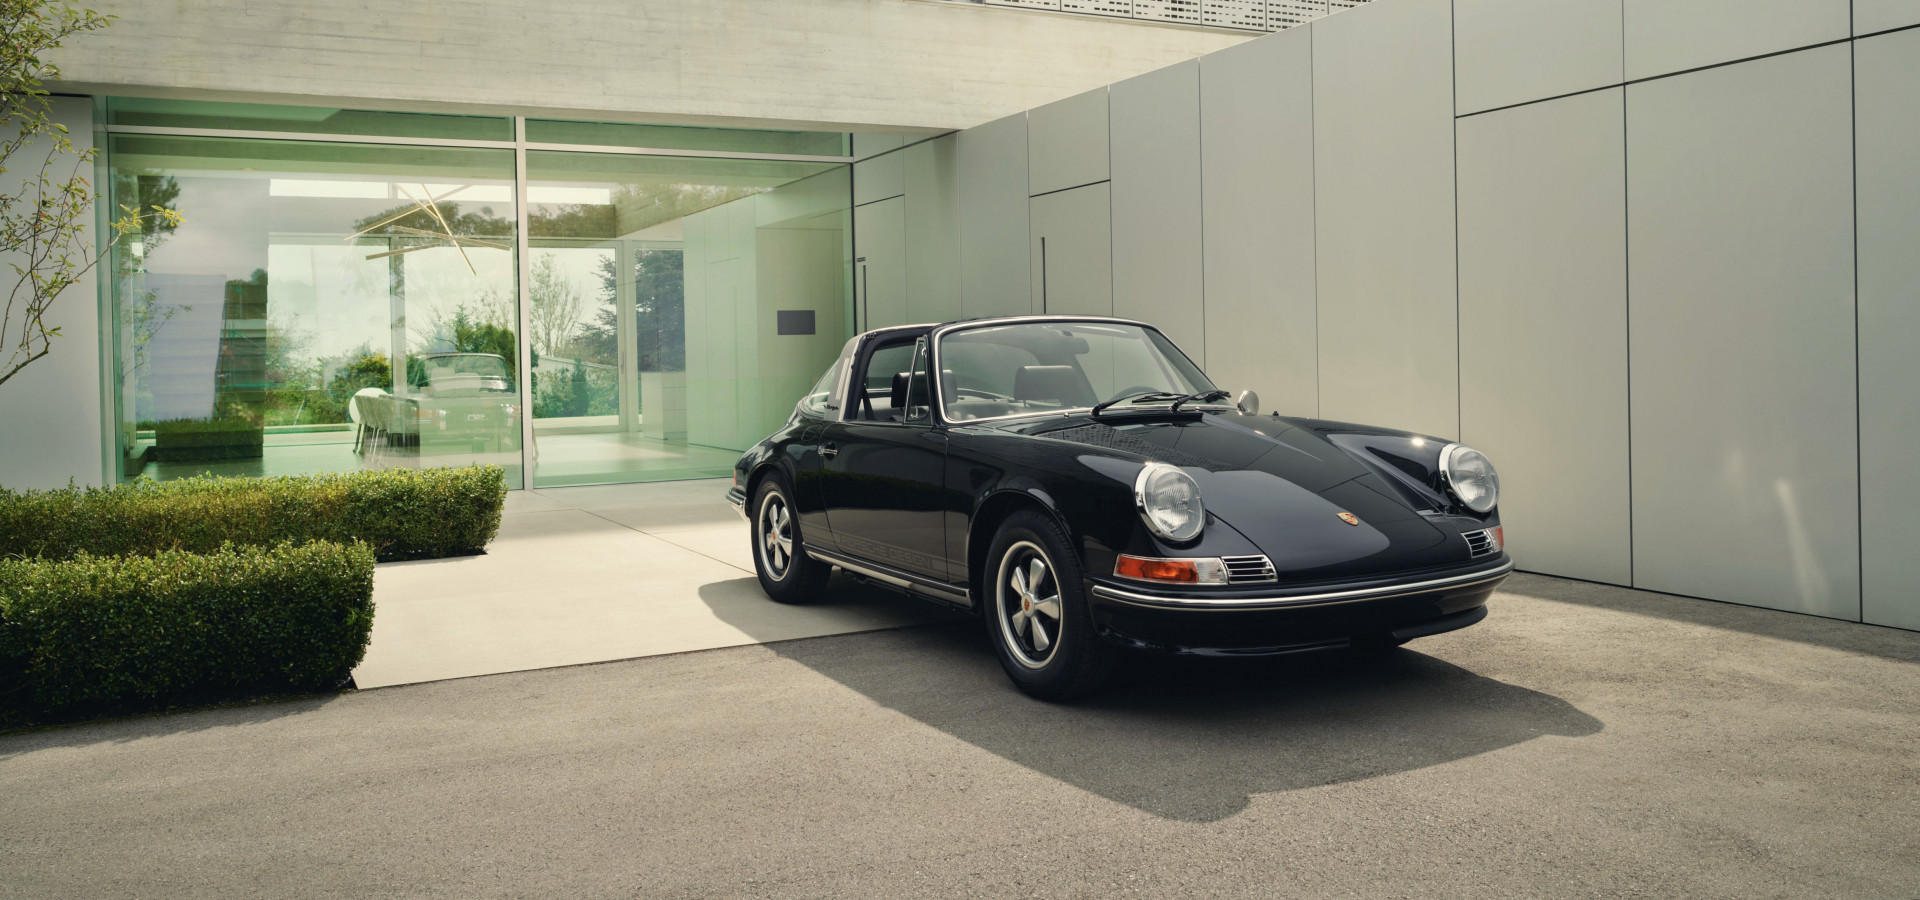 Porsche Design and Sotheby’s auction two icons of design history